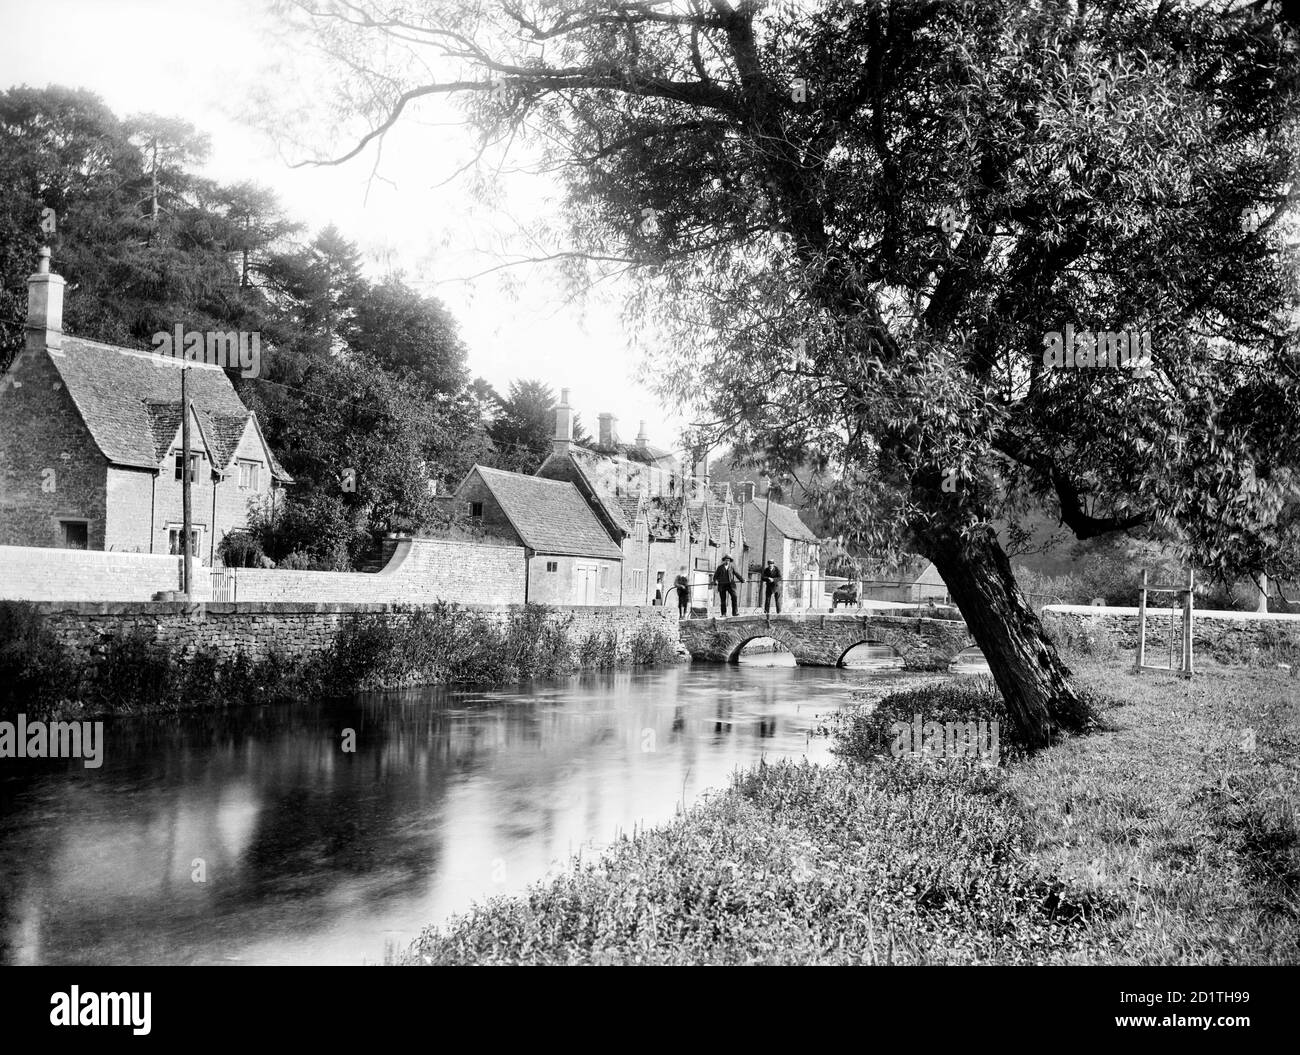 BIBURY, Gloucestershire. Looking along the river towards the stone bridge beside Arlington Row. The Cotswold village of Bibury was described as the most beautiful village in England by William Morris. Photographed in 1906 by Henry Taunt. Stock Photo